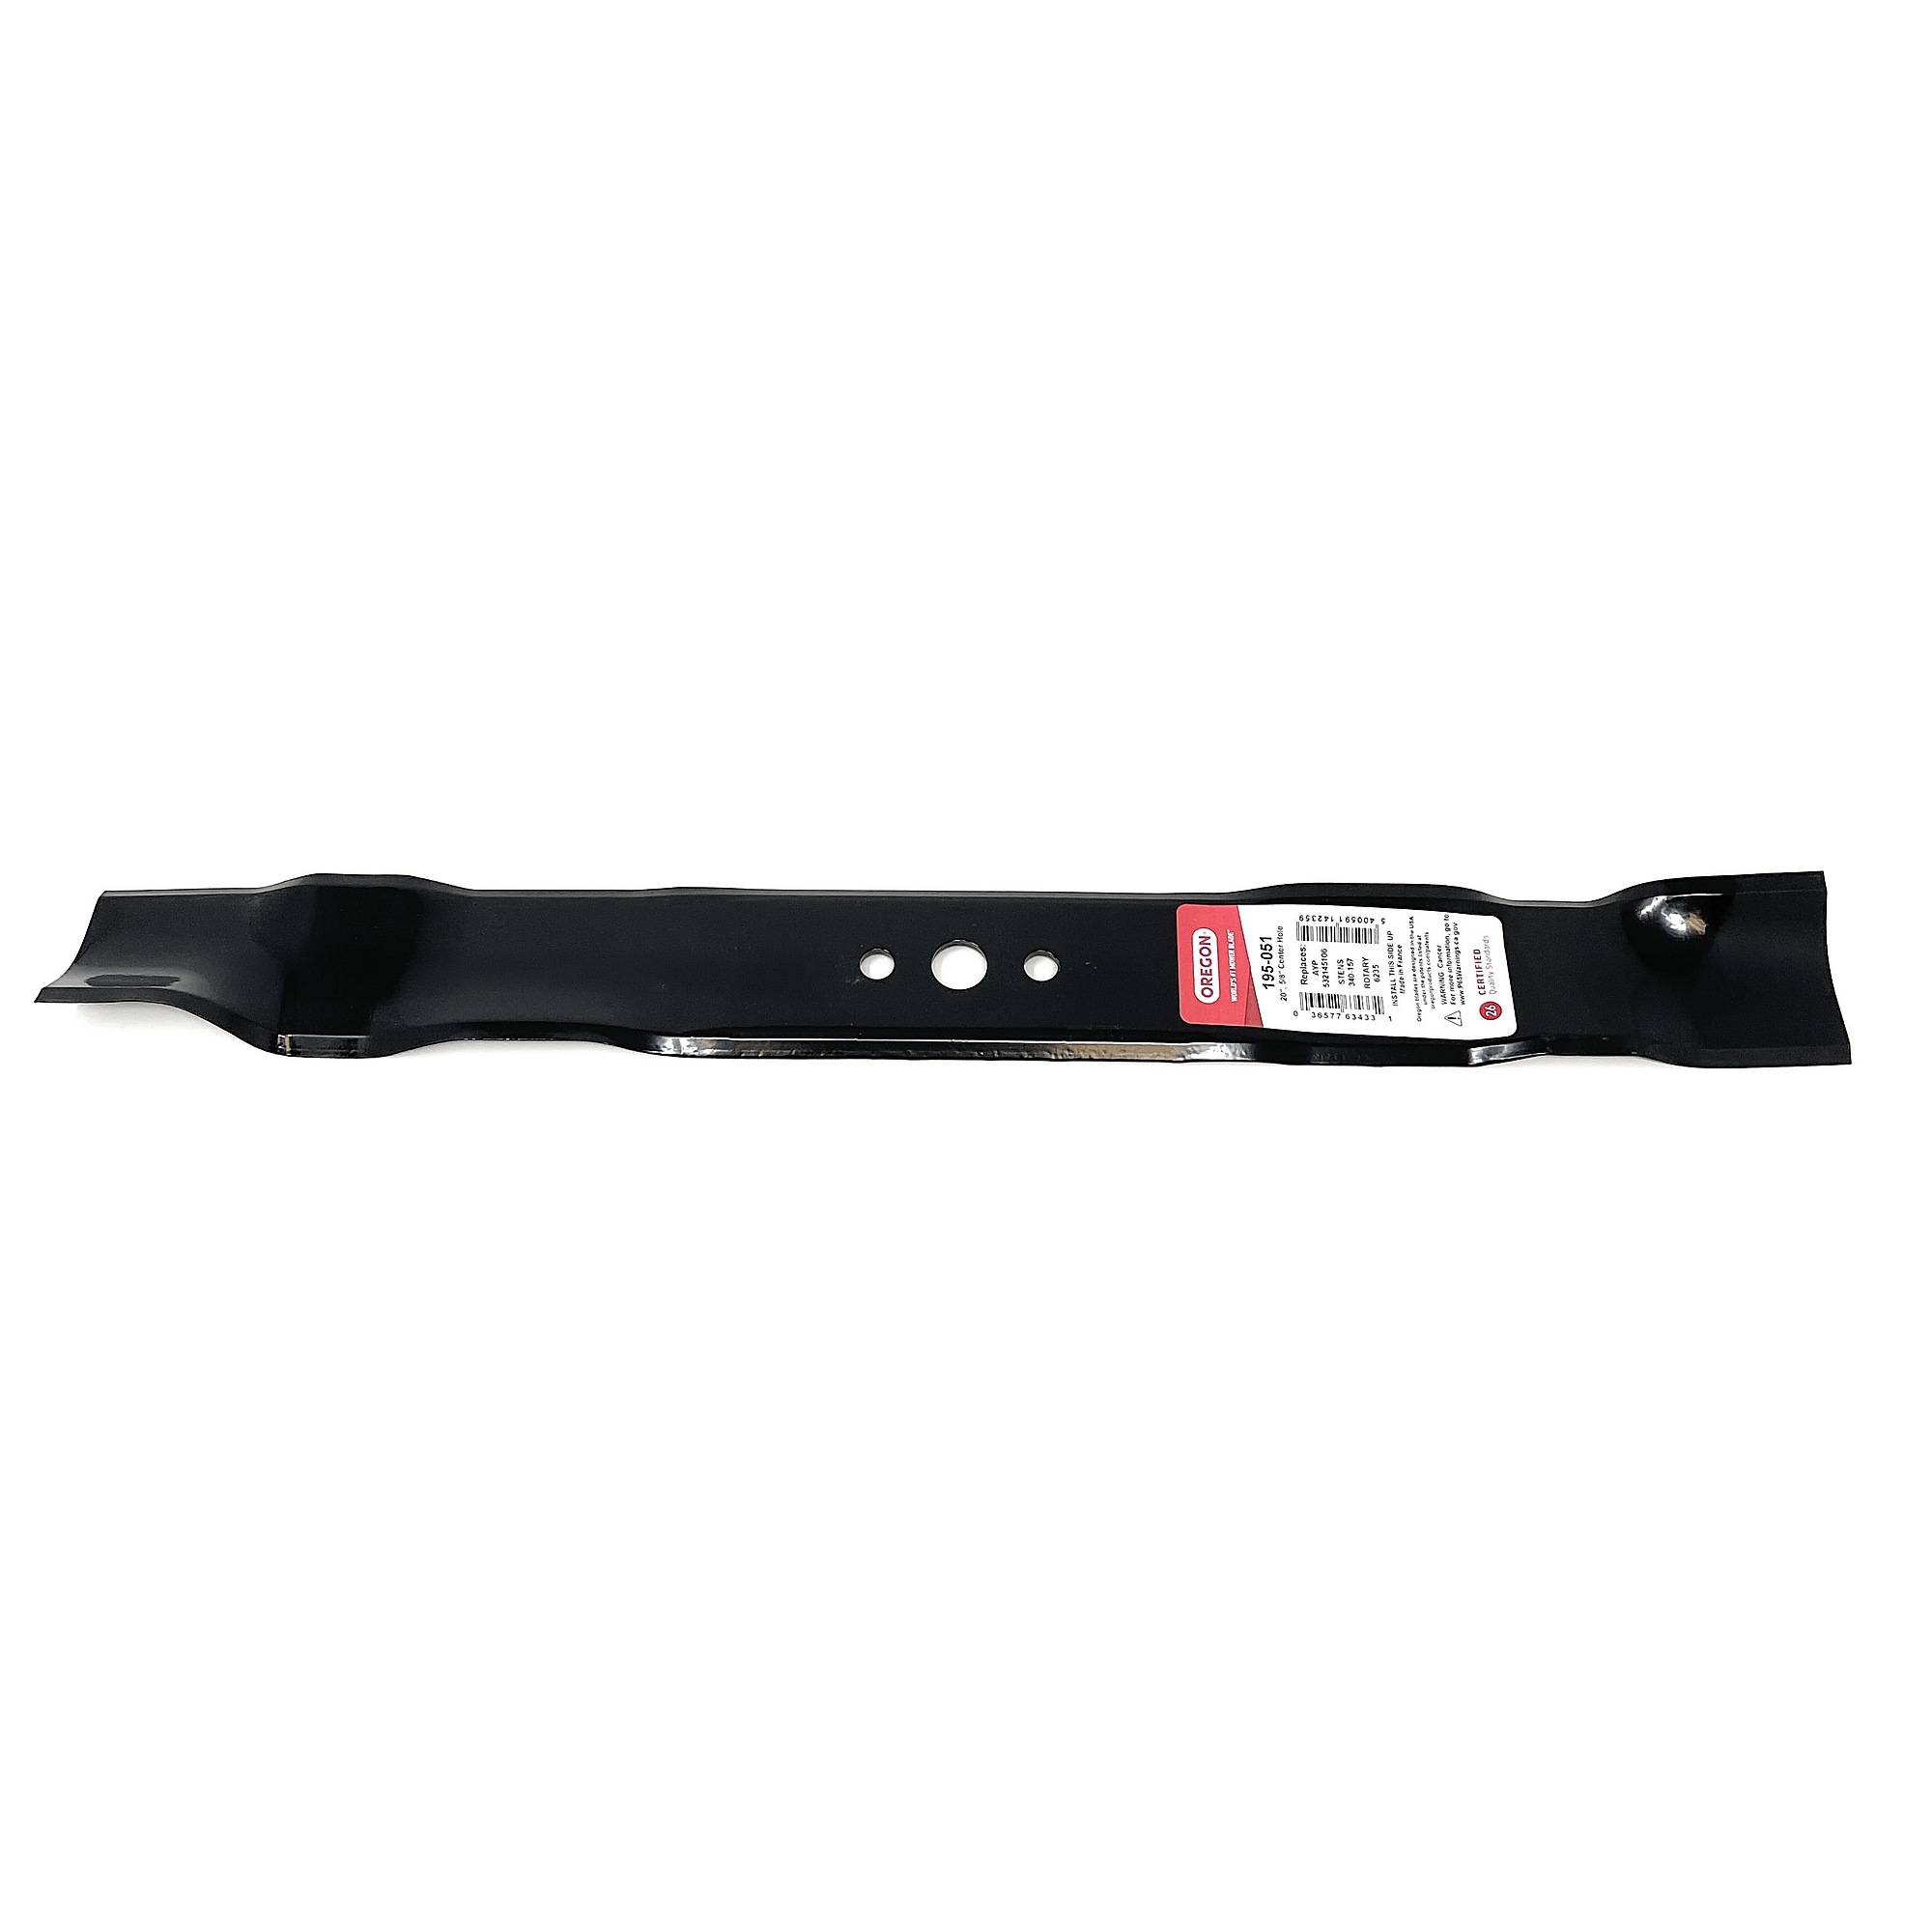 Oregon, Replacement Lawn Mower Blade, Mulching, Length 20 in, Model 195-051